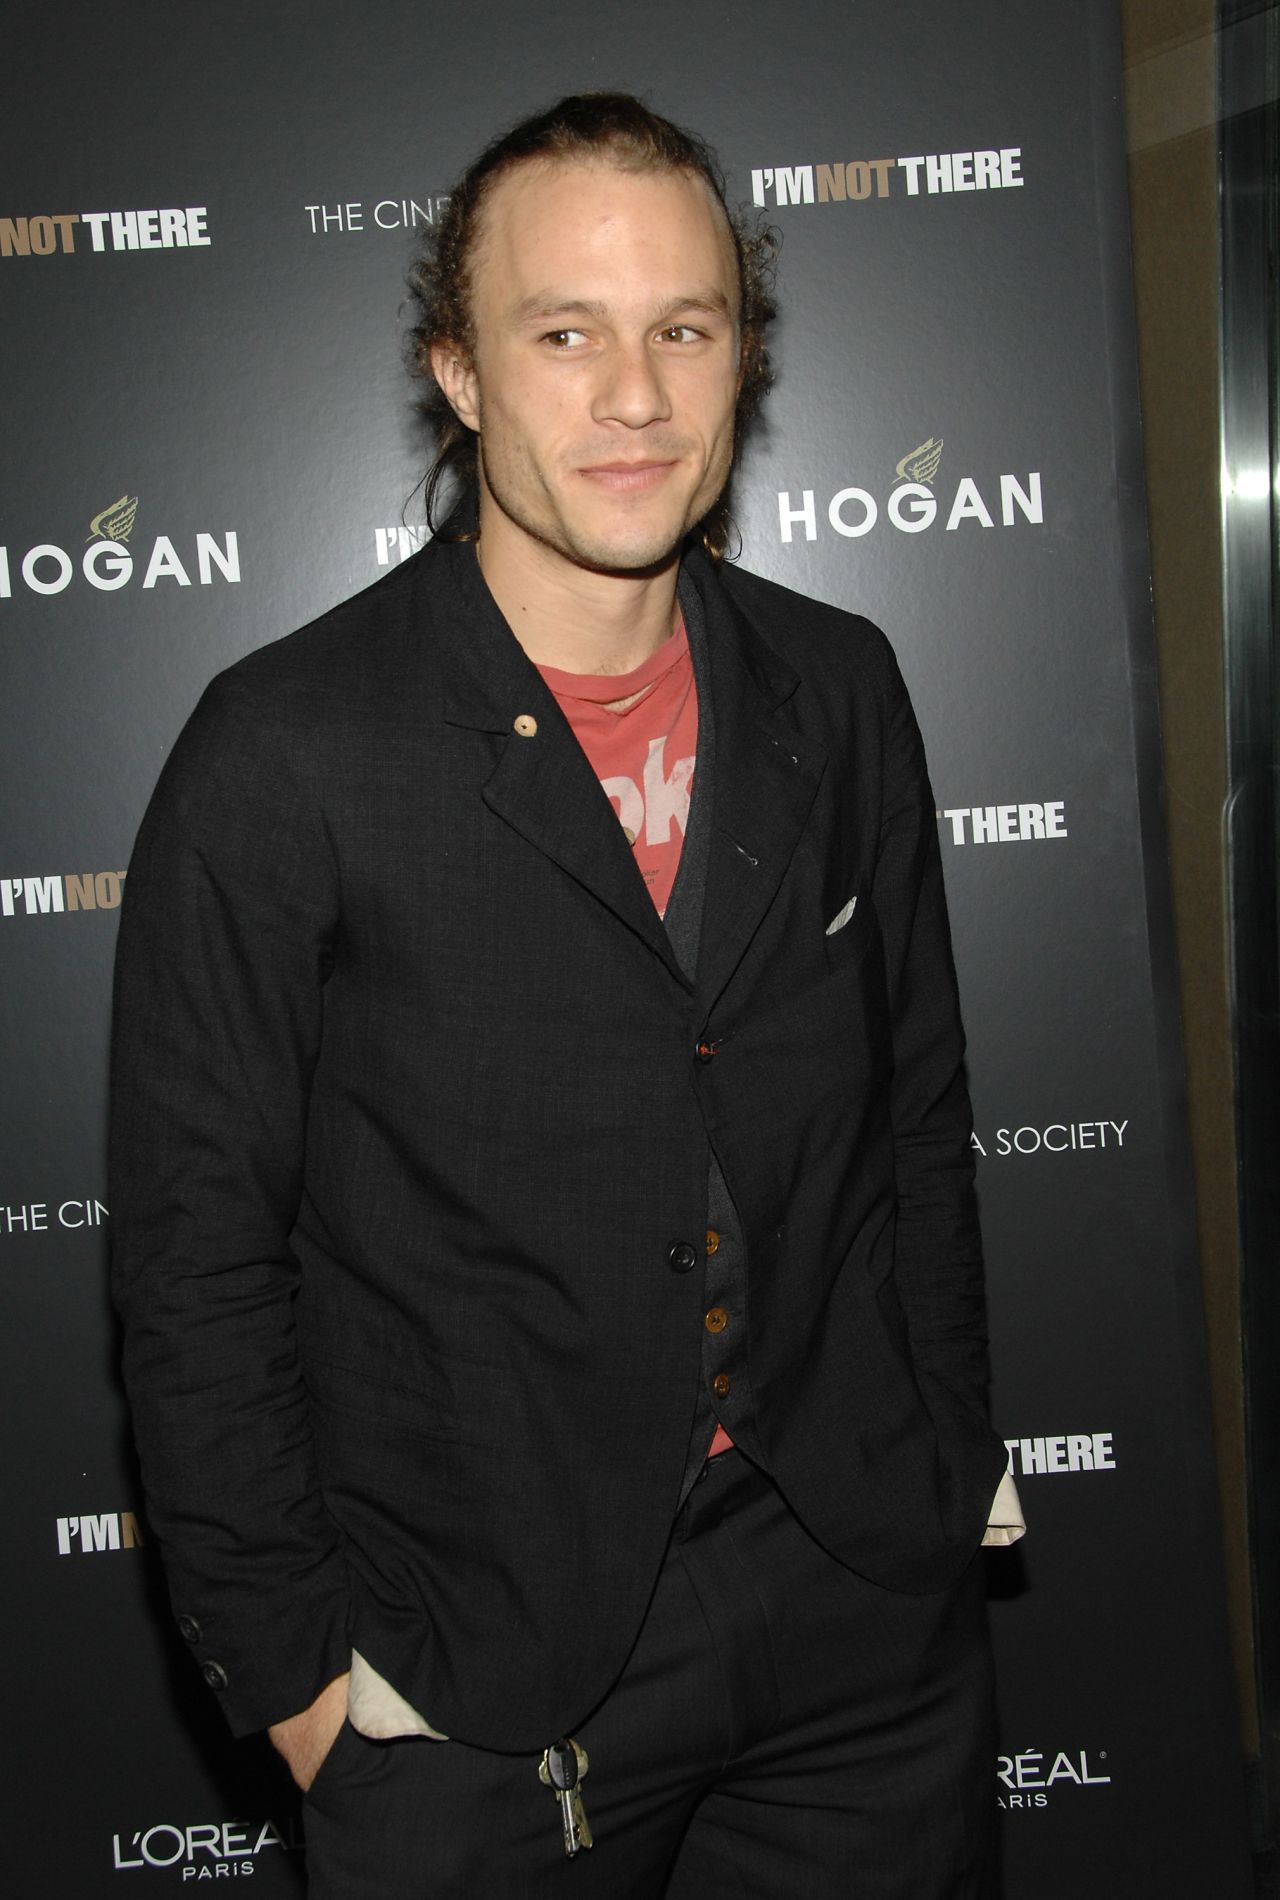 Australian actor Heath Ledger, star of "A Knight's Tale," "Brokeback Mountain" and the Batman sequel "The Dark Knight," died in 2008 of a <a href="http://www.cnn.com/2008/SHOWBIZ/Movies/02/06/heath.ledger/">prescription drug overdose</a>. He was 28. Opiates such as oxycodone (OxyContin) and hydrocodone (Vicodin) were found in his system, along with alprazolam (Xanax), diazepam (Valium) and two insomnia drugs.  